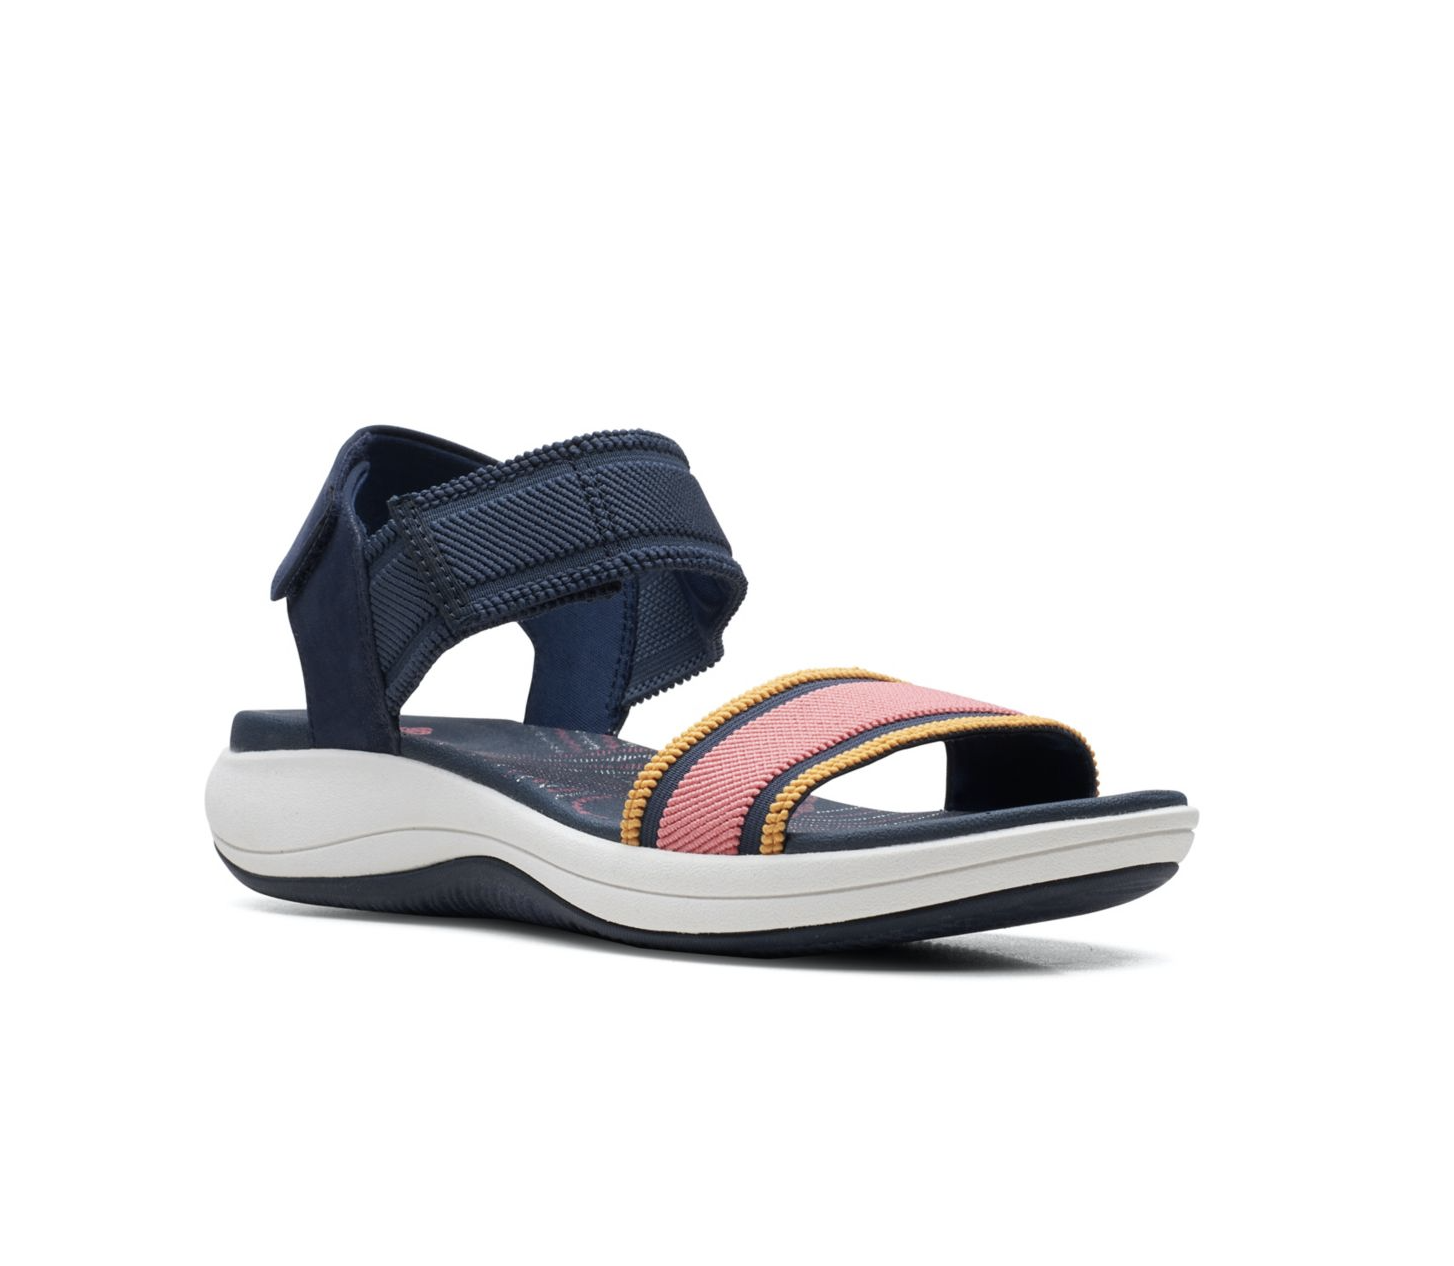 Buy > white comfortable sandals > in stock